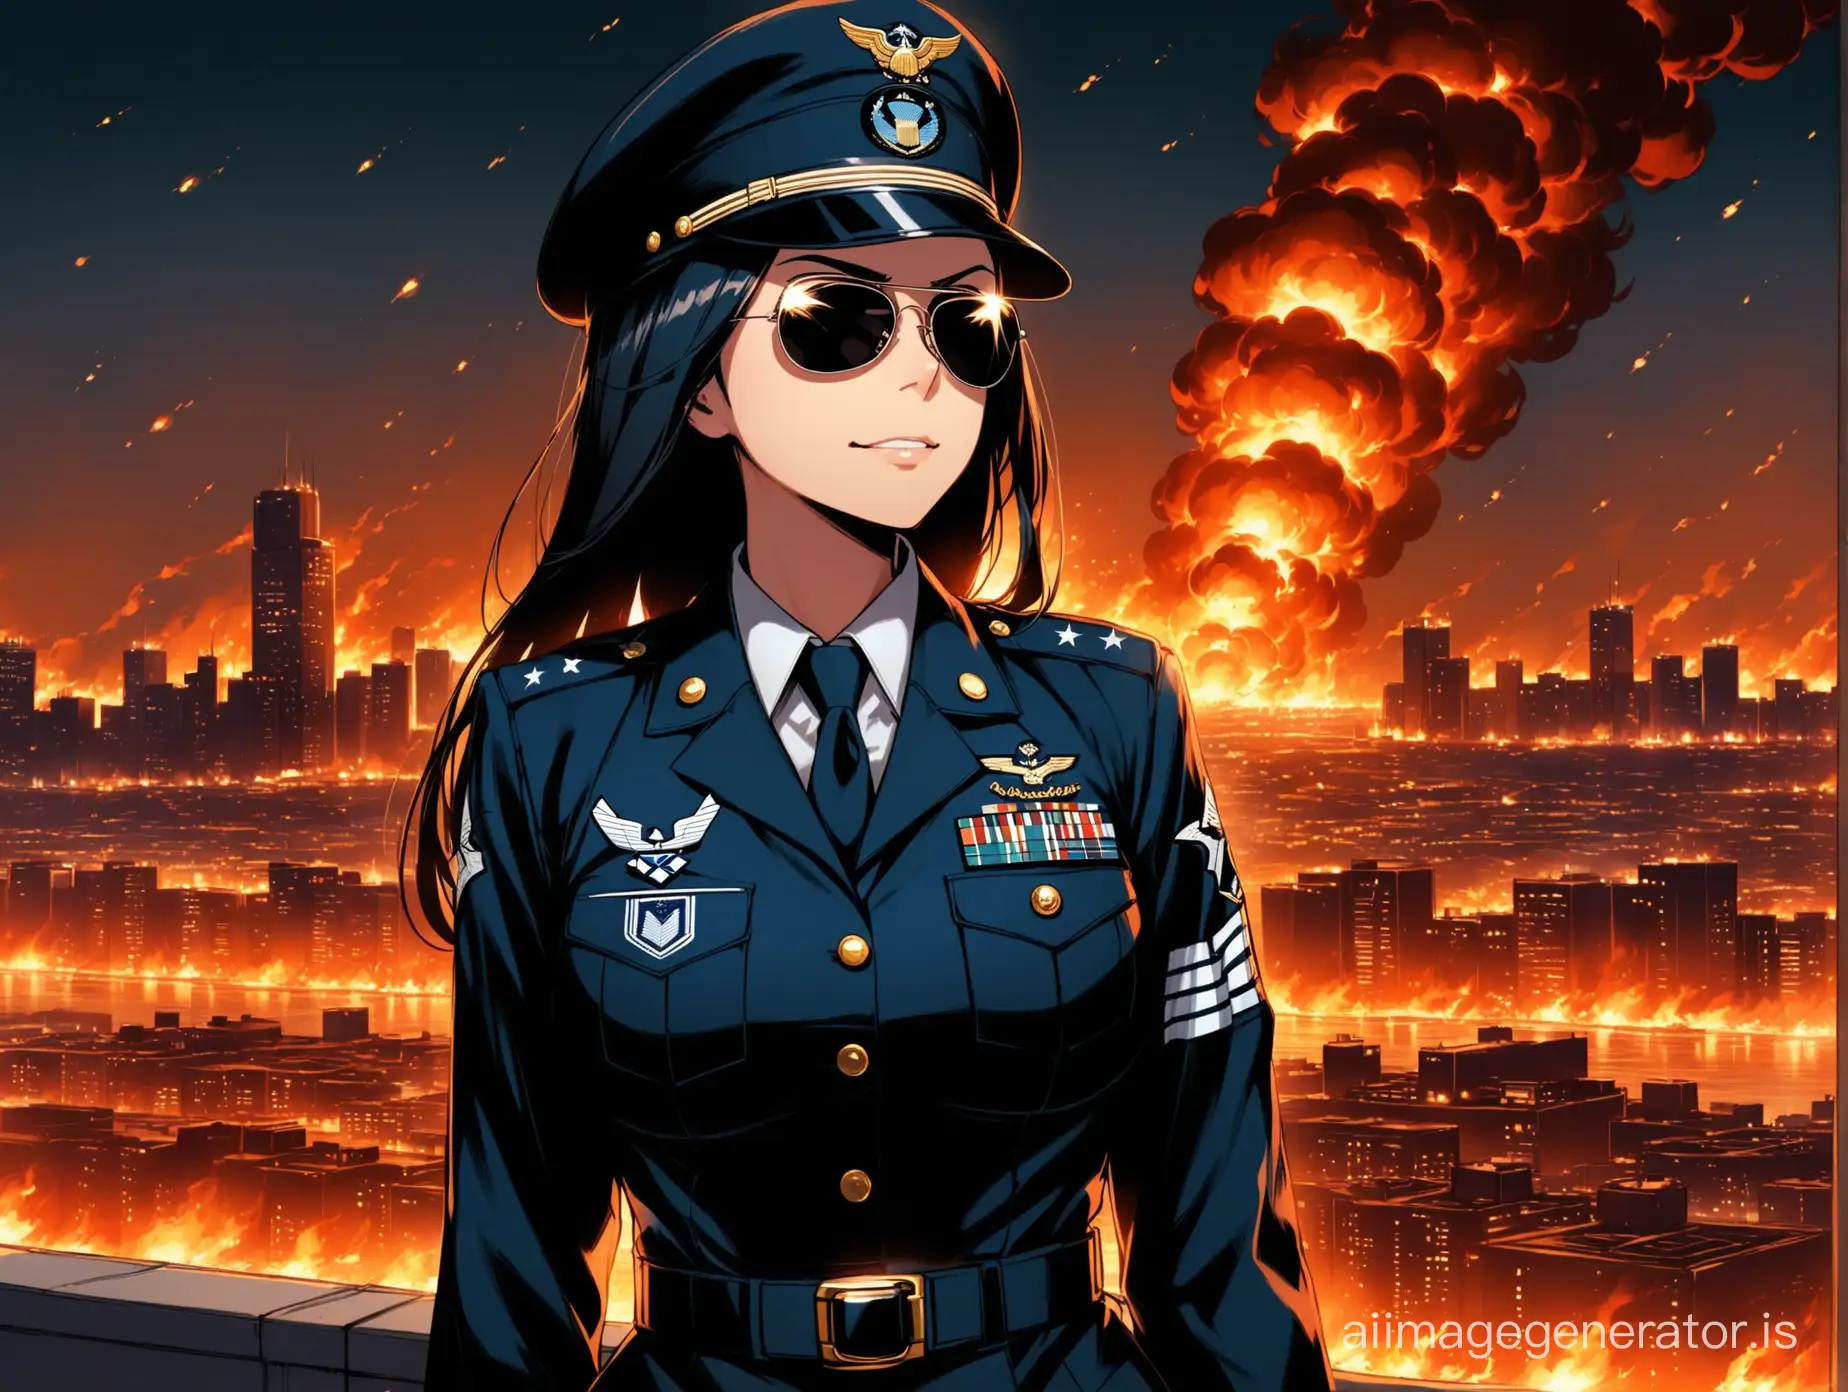 A serious woman with black hair in a black Air Force officer's uniform, wearing dark aviator sunglasses and a cap, stands with her hands behind her back, looking forward-right, against the backdrop of a burning city at night, slightly smirking.